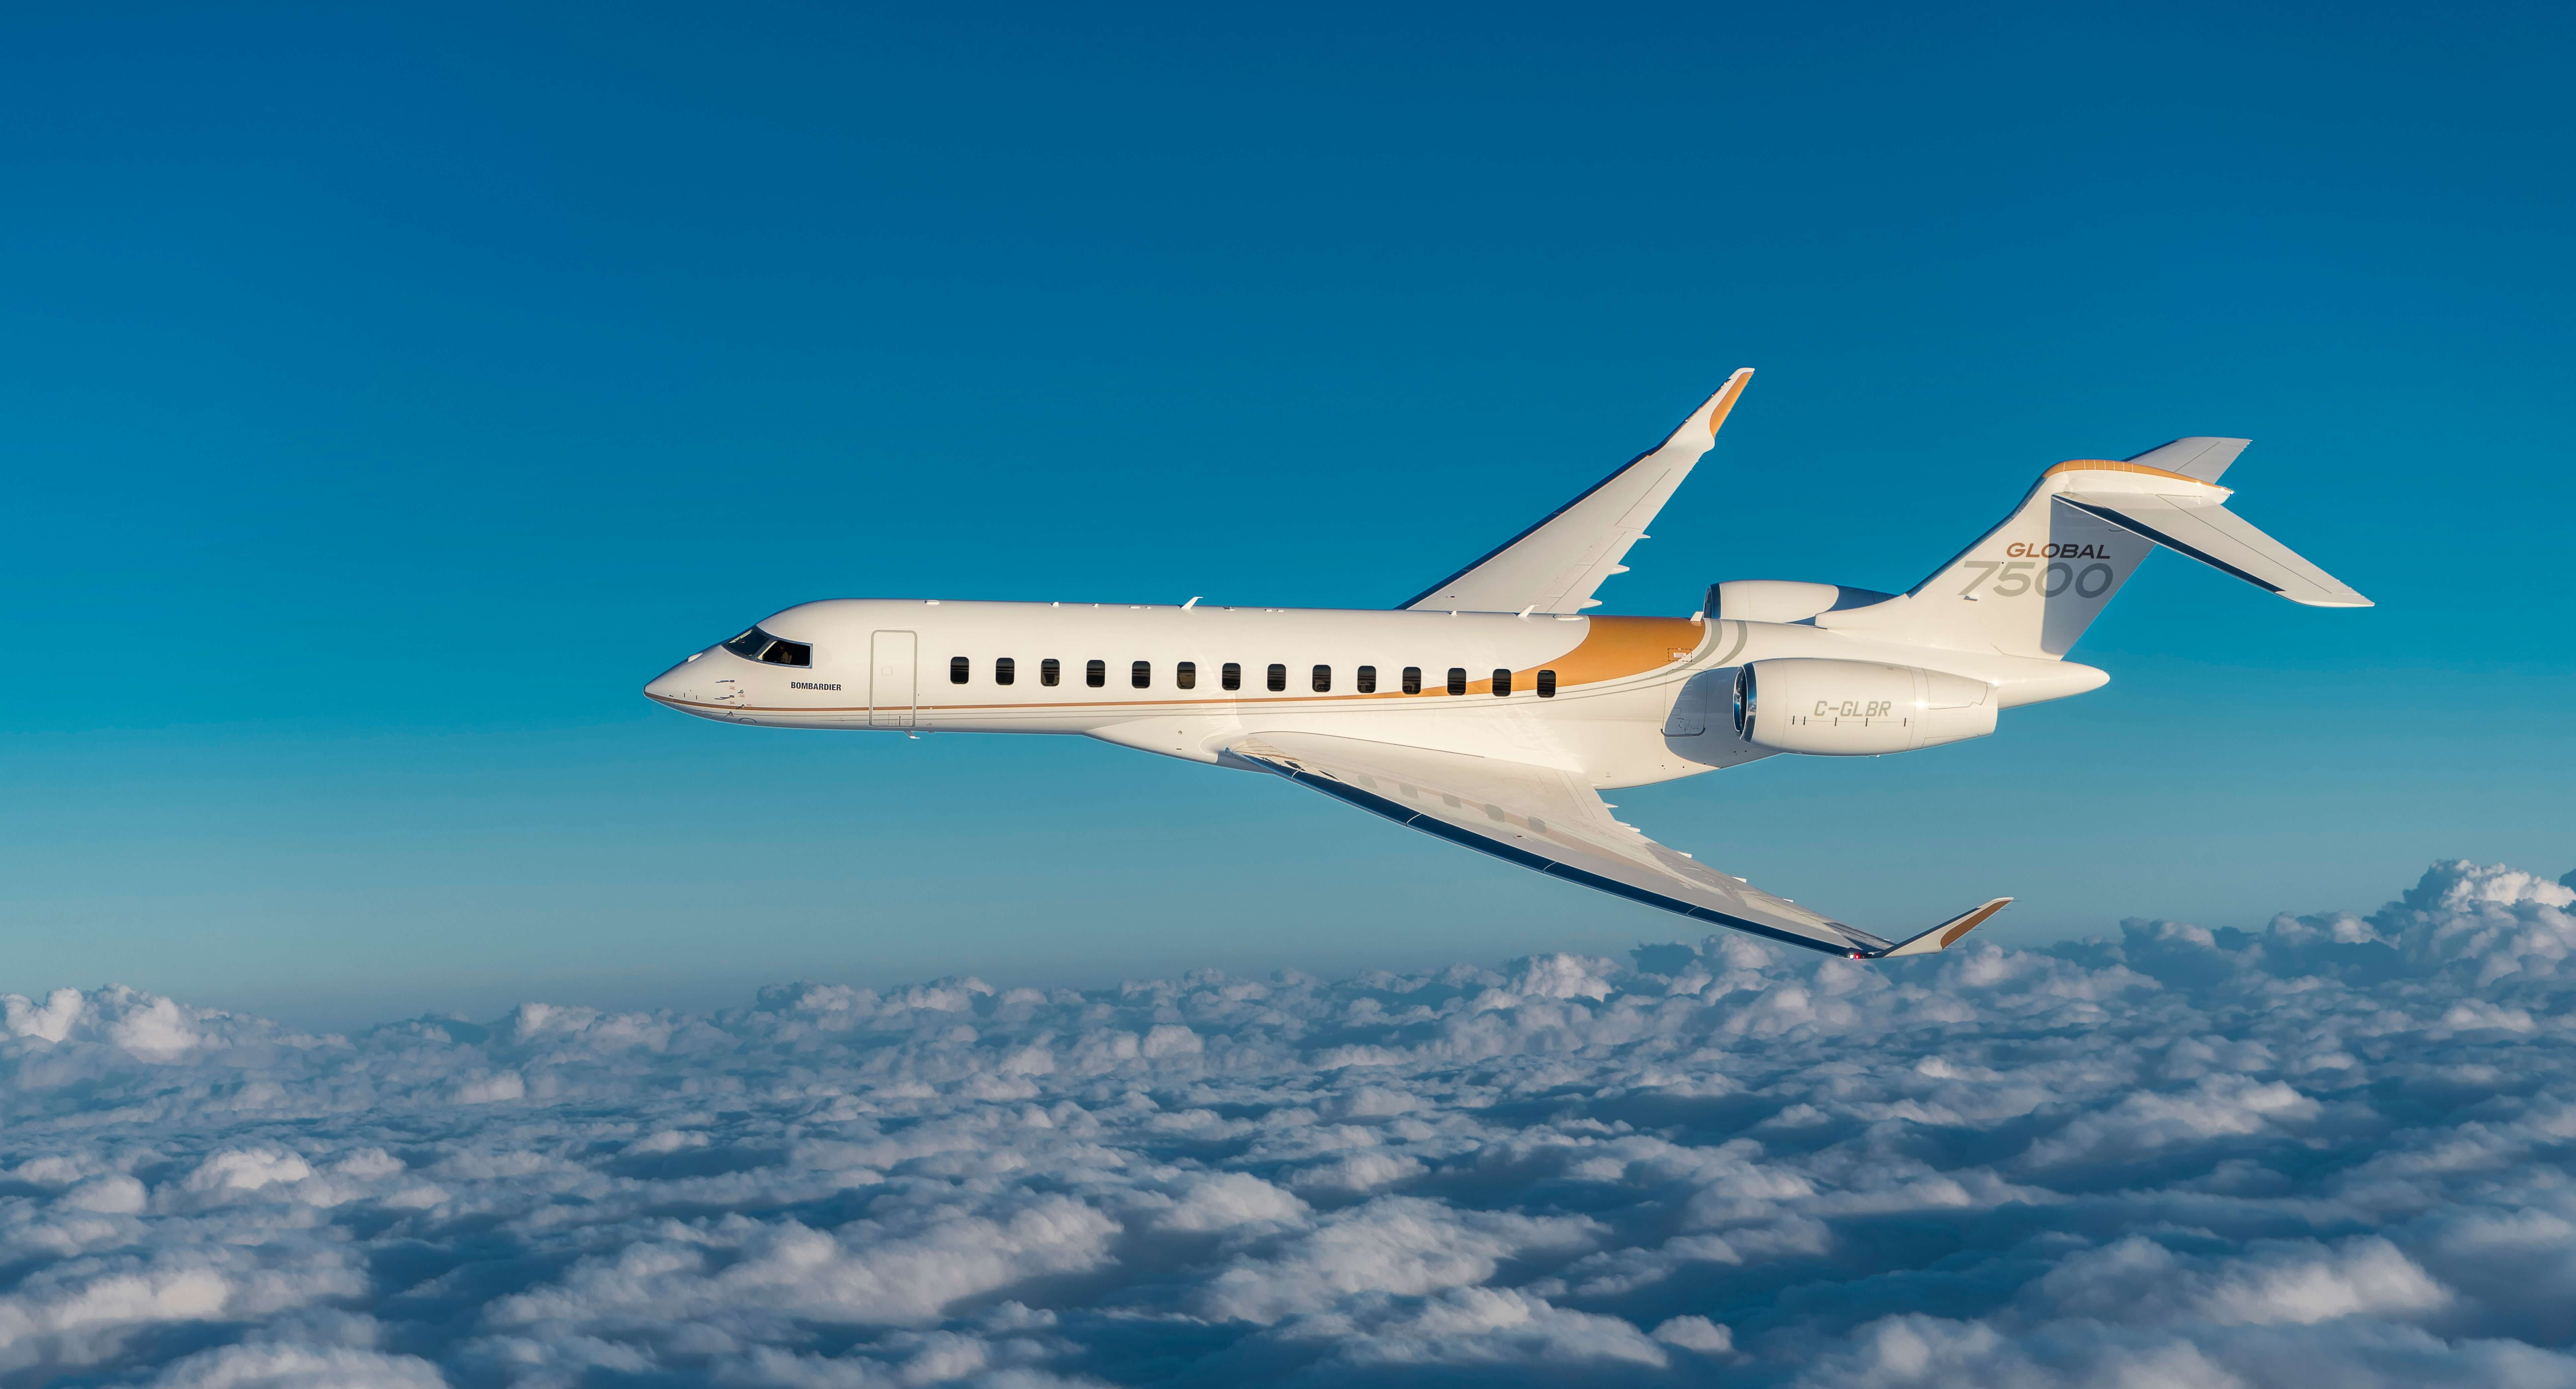 Bombardier completes acquisition of Global 7500 aircraft wing program